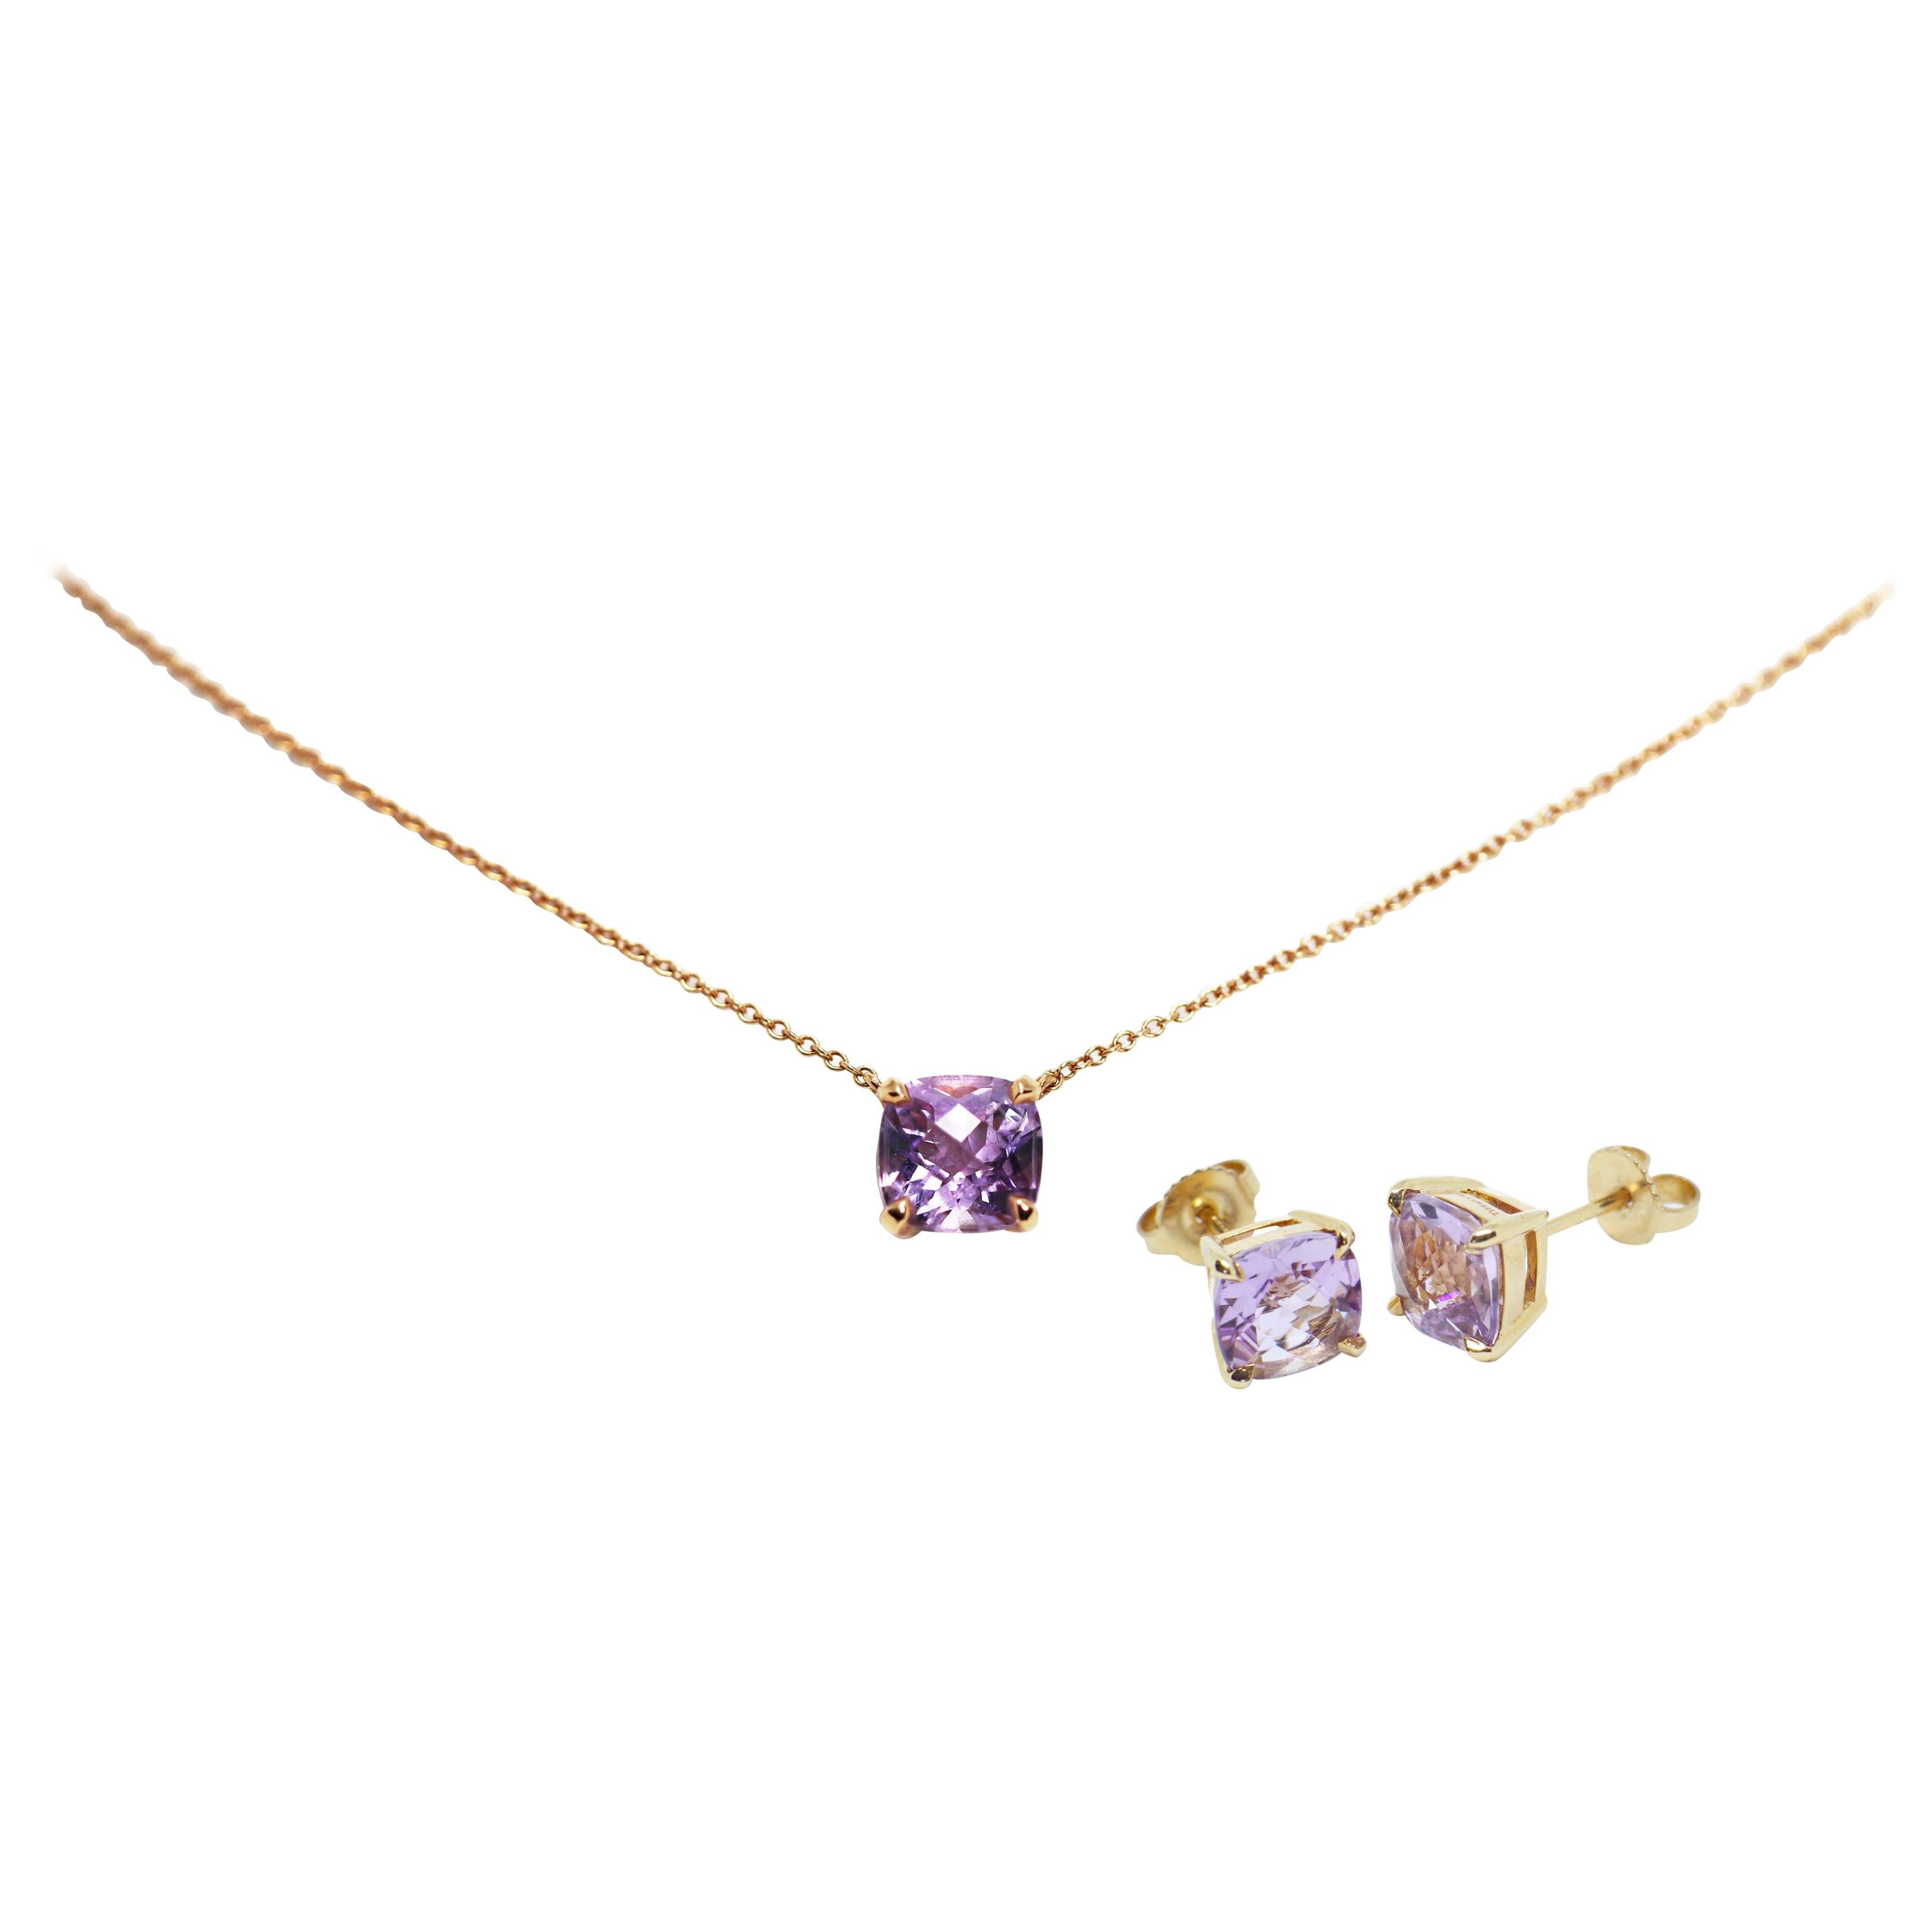 Tiffany & Co Amethyst Necklace and Earring Set in 18 Carat Rose Gold